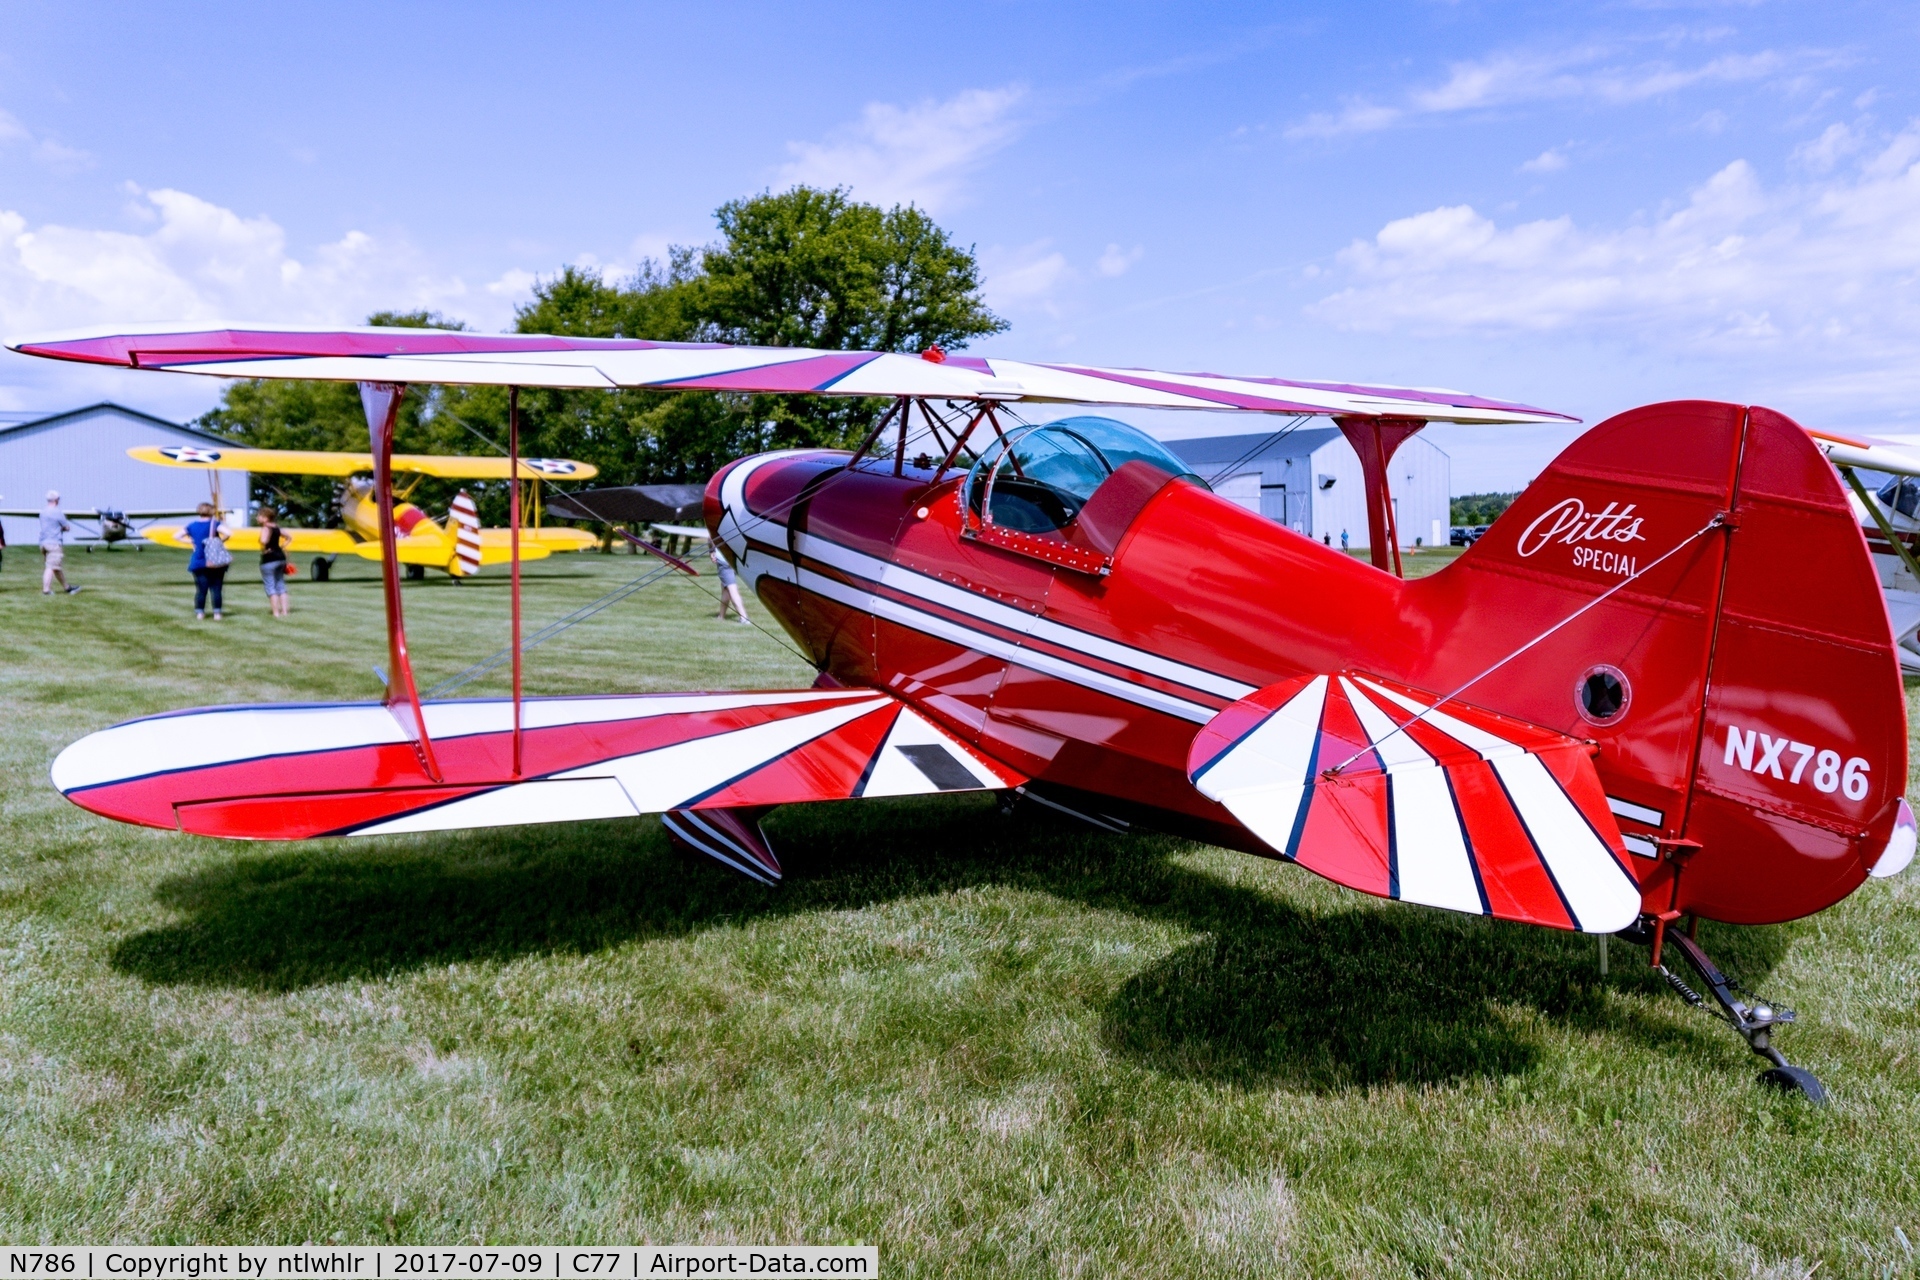 N786, 1983 Pitts S-1E Special C/N 0786, Parked at the Poplar Grove EAA Pancake Breakfast Fly In